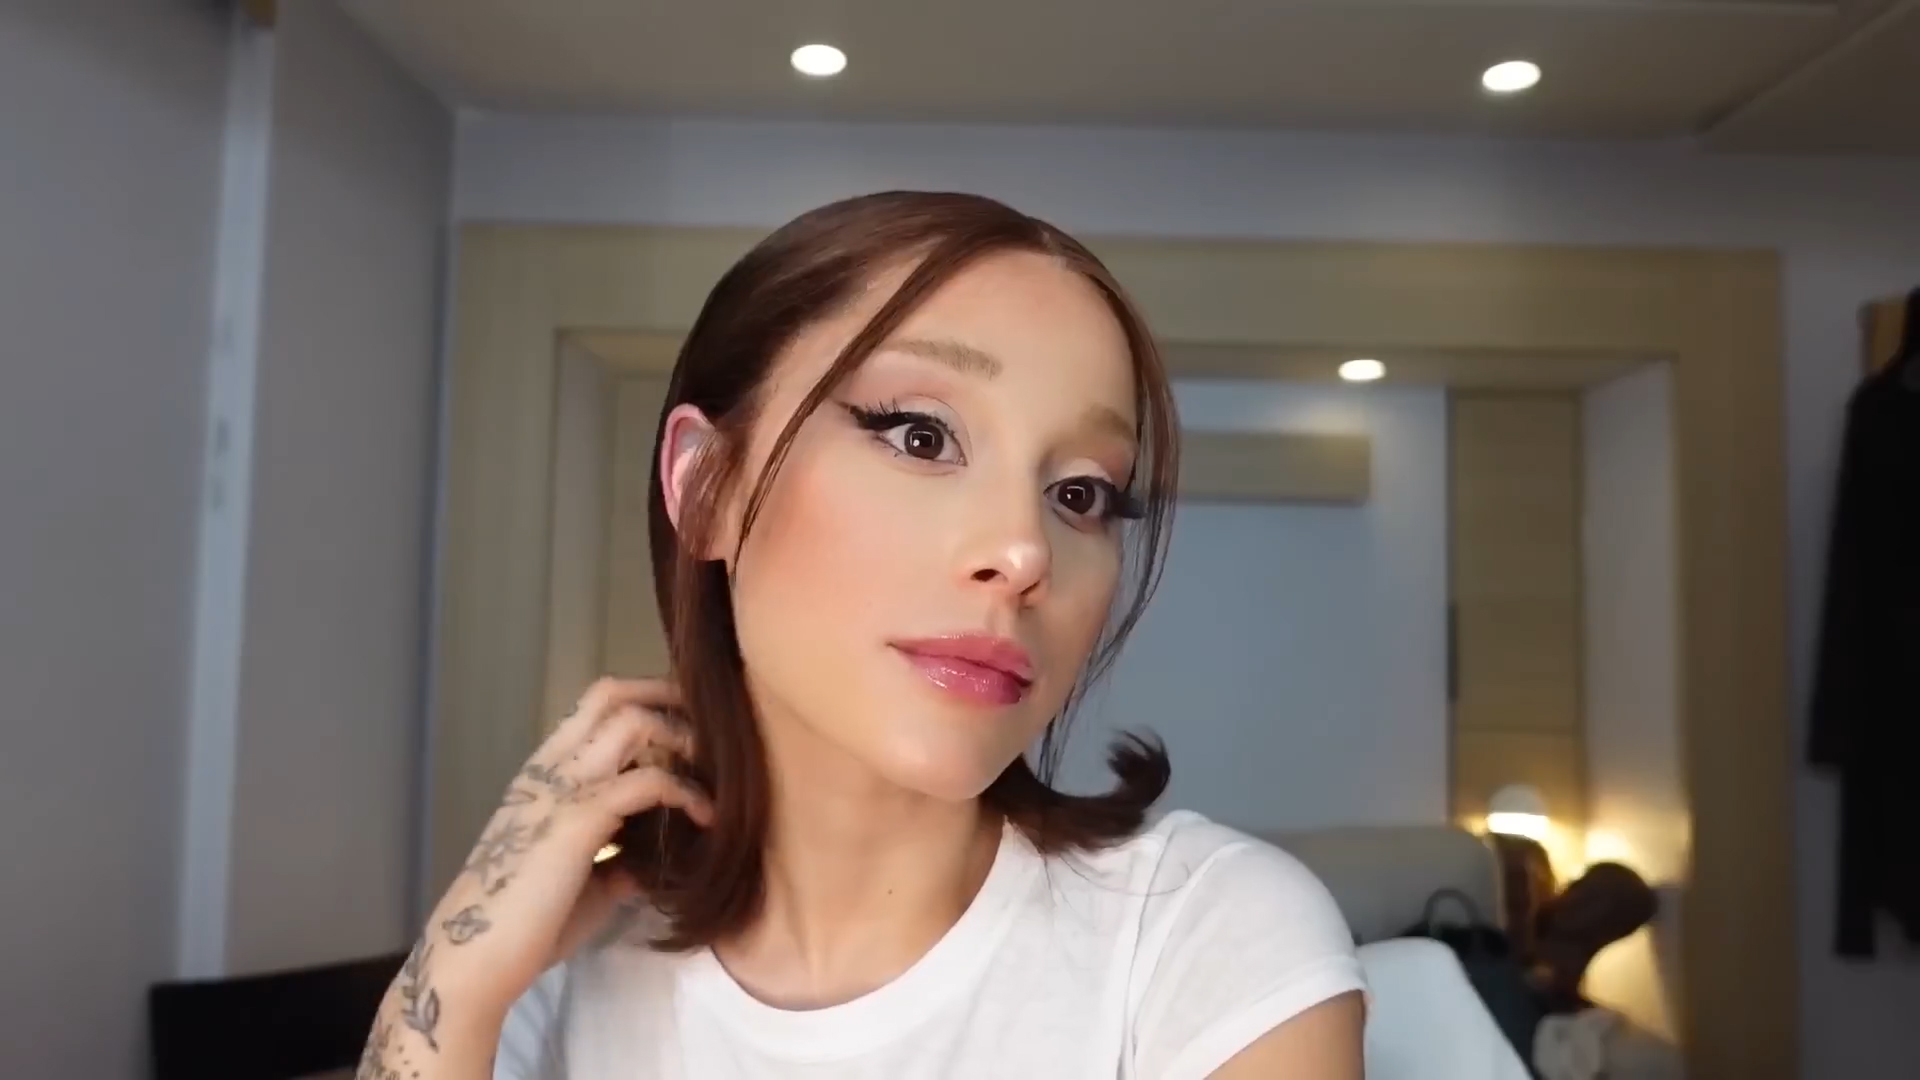 The star shared an 'insane' part of her makeup routine